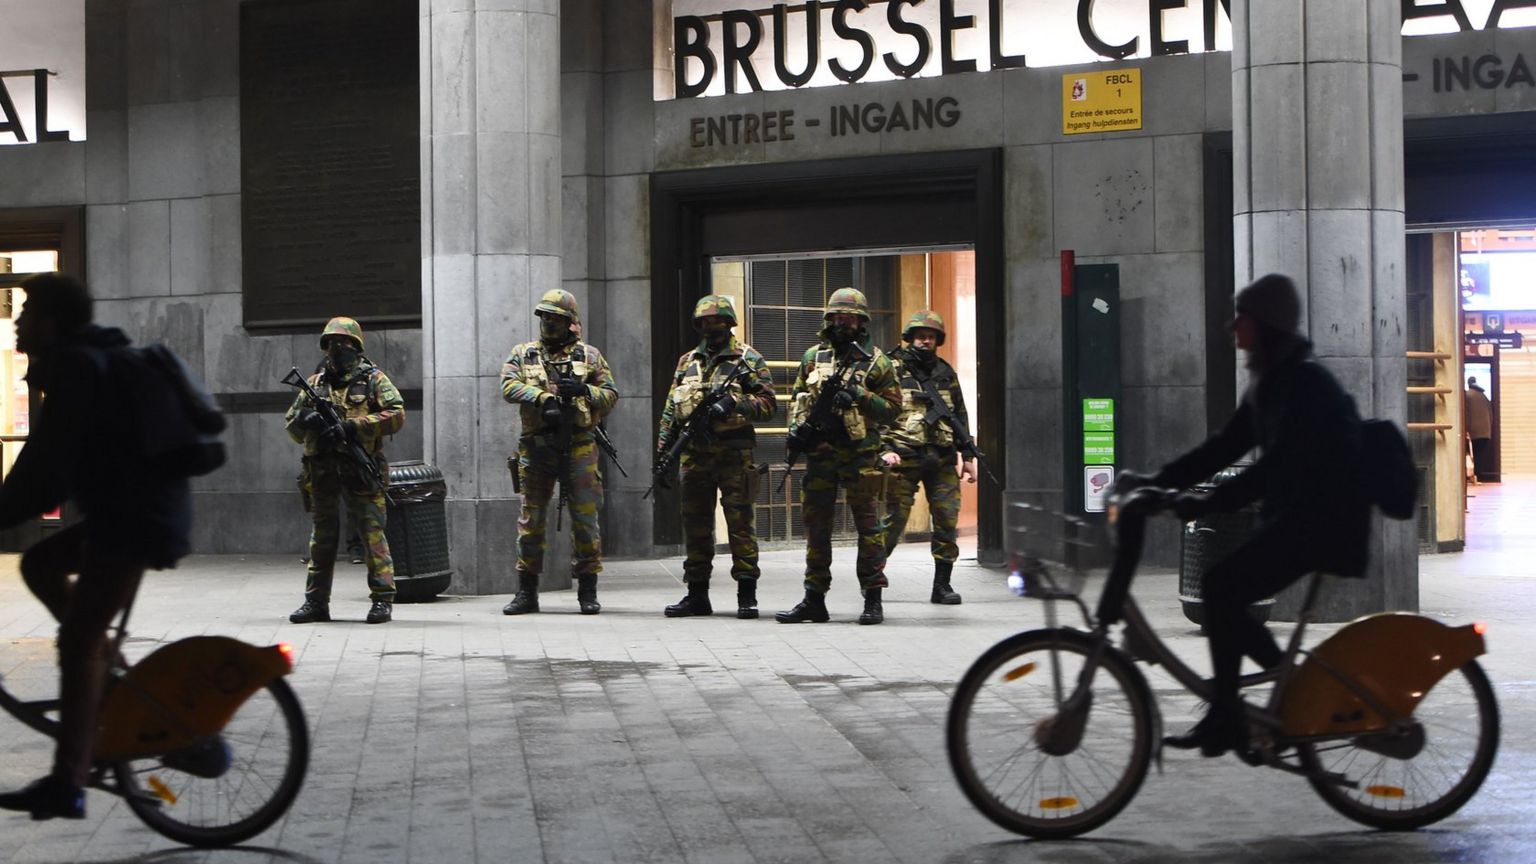 Soldiers outside Brussels central rail station